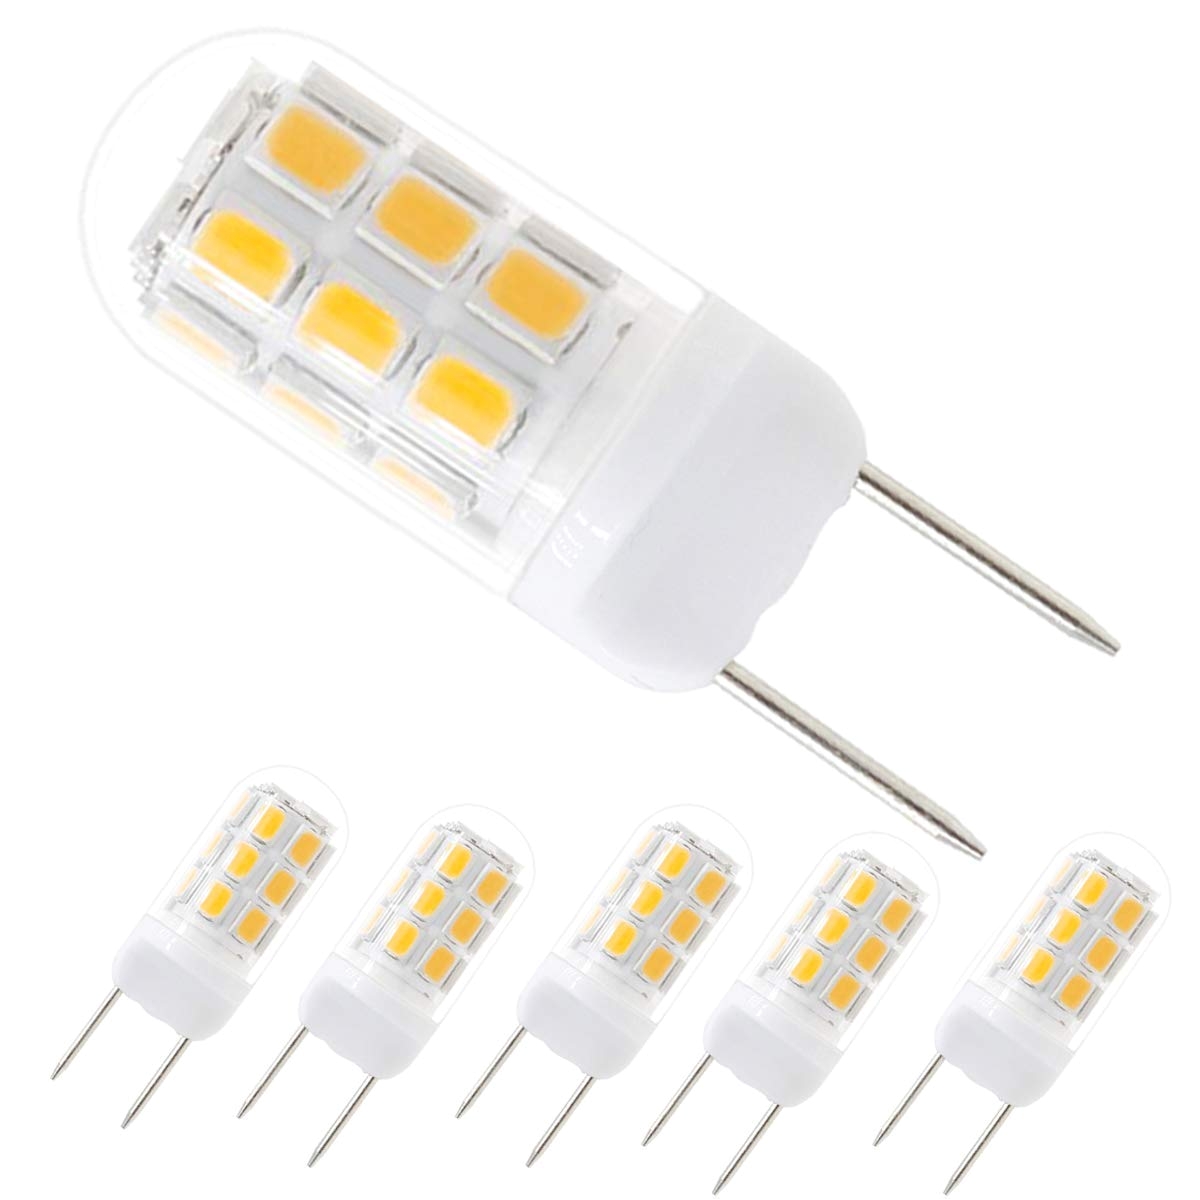 all new led g8 light bulb g8 gy8 6 bi pin base led dimmable 120v 35w halogen replacement bulb for under counter kitchen lighting under cabinet light